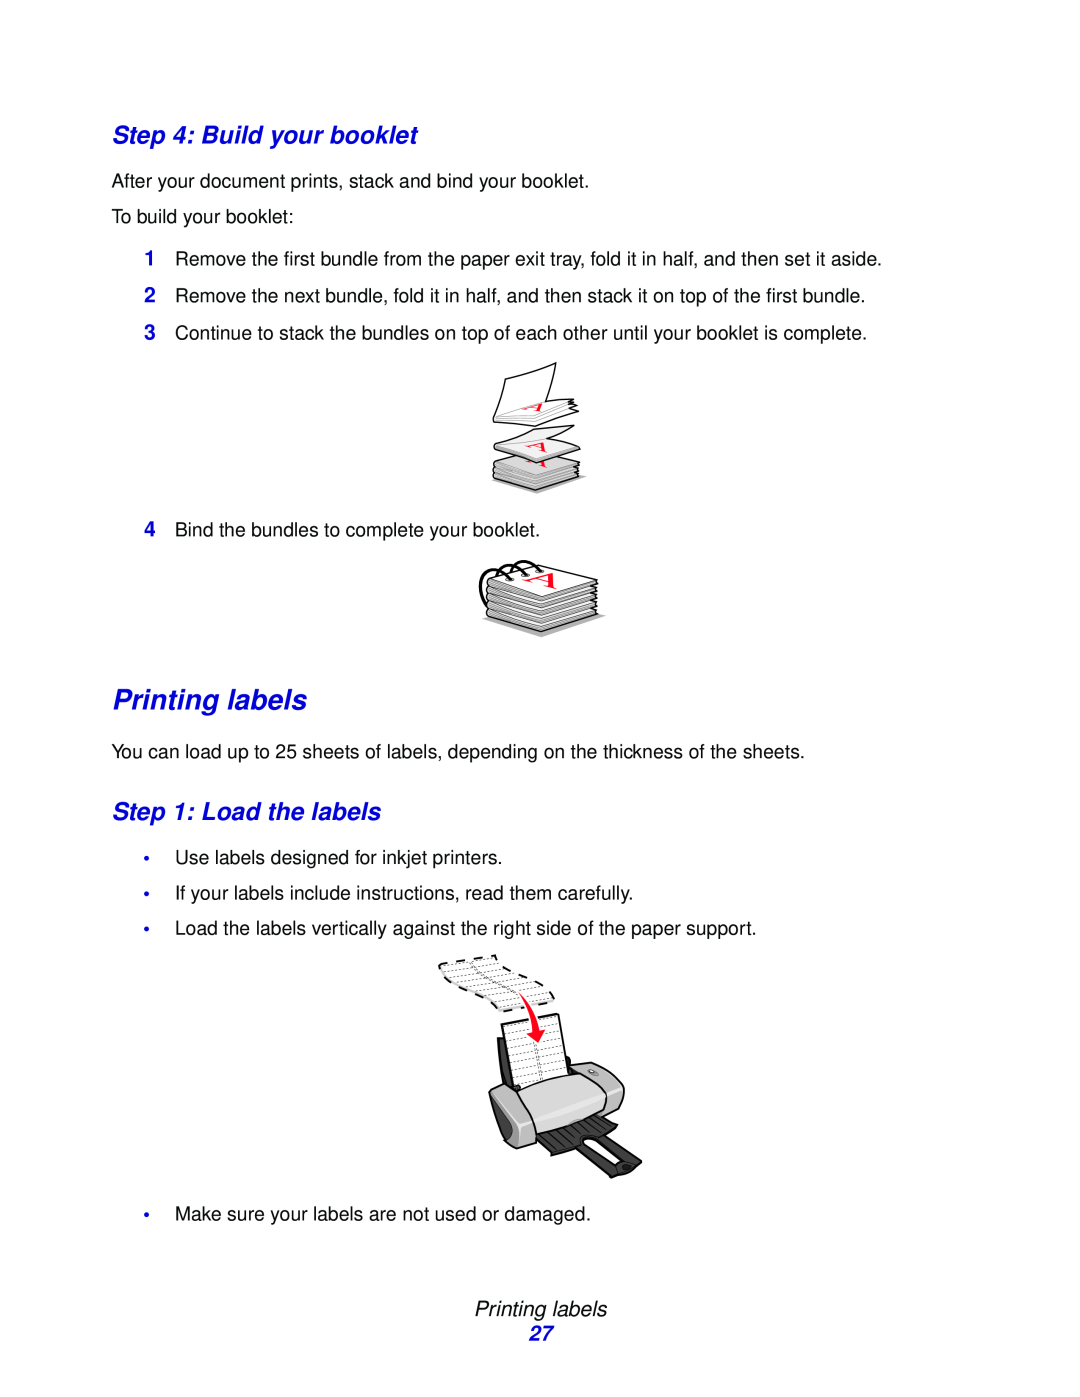 Lexmark Z600 Series manual Printing labels, Build your booklet, Load the labels 